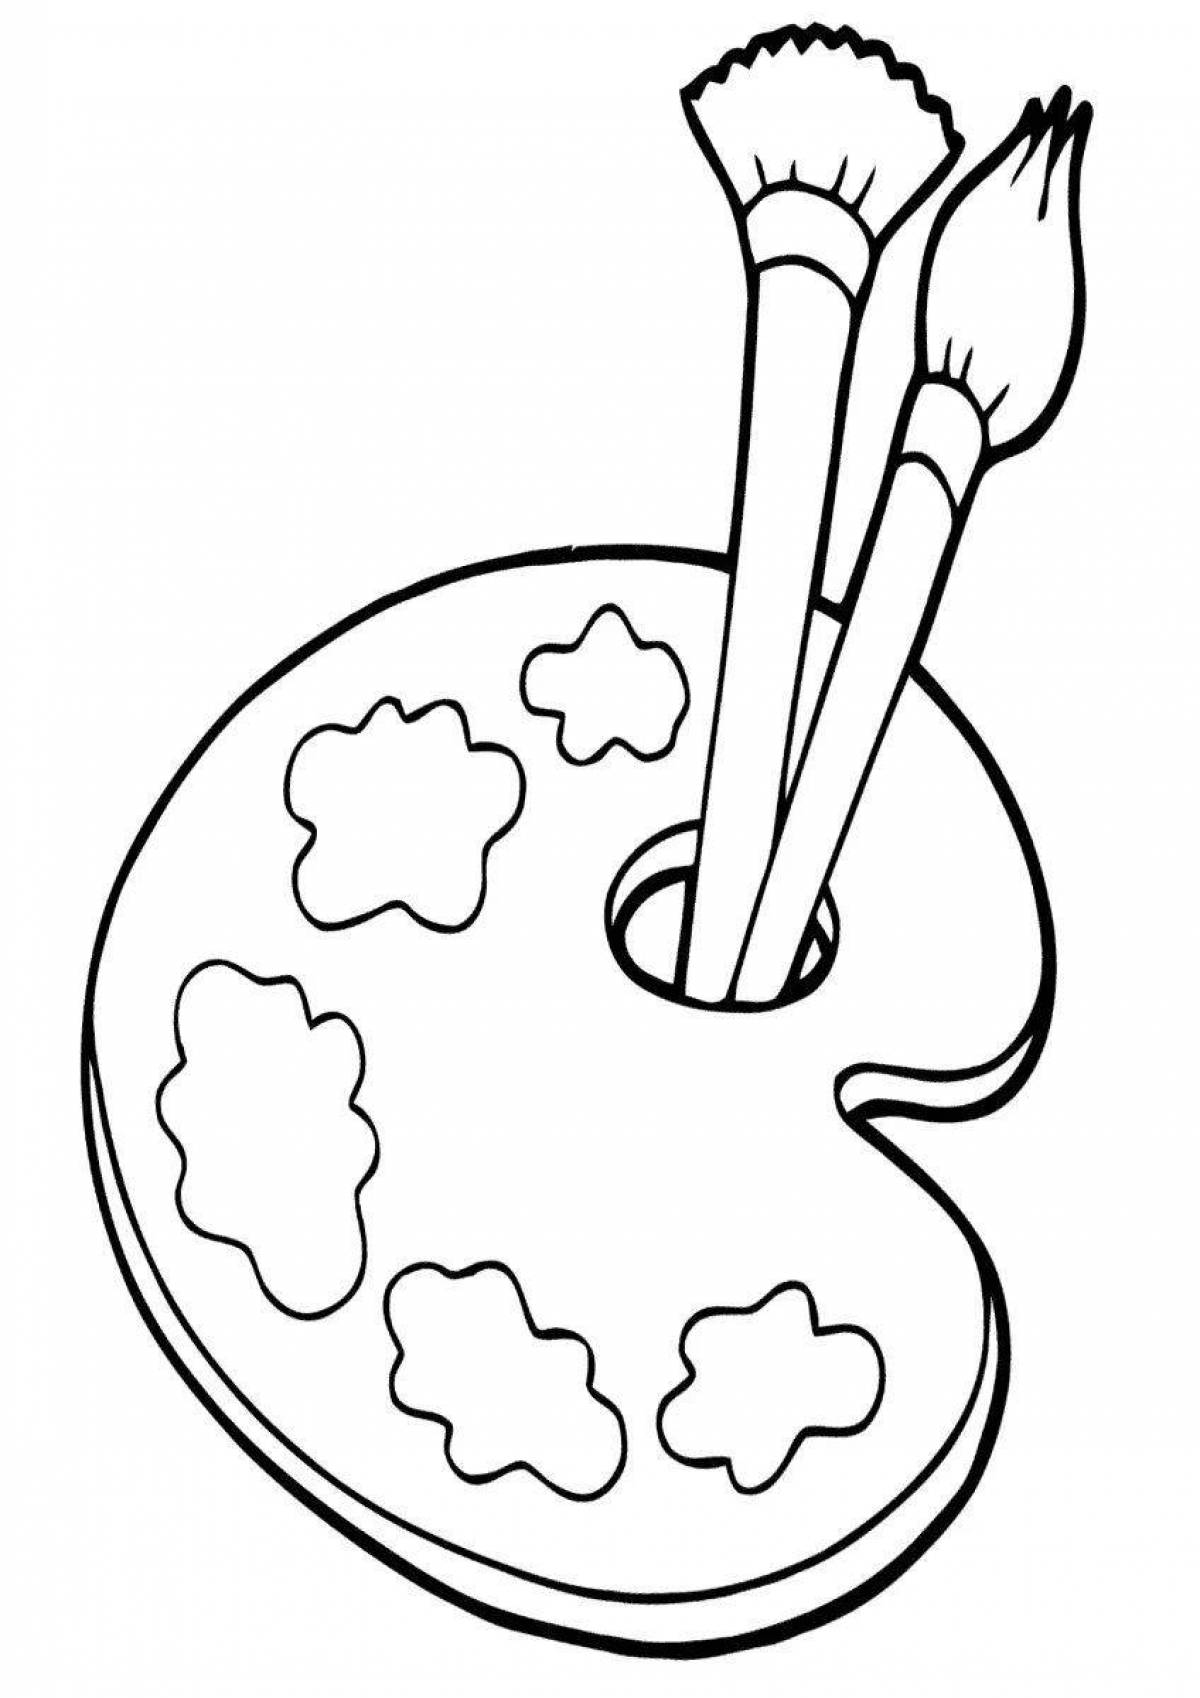 Coloring-illustrator paints and brush coloring page